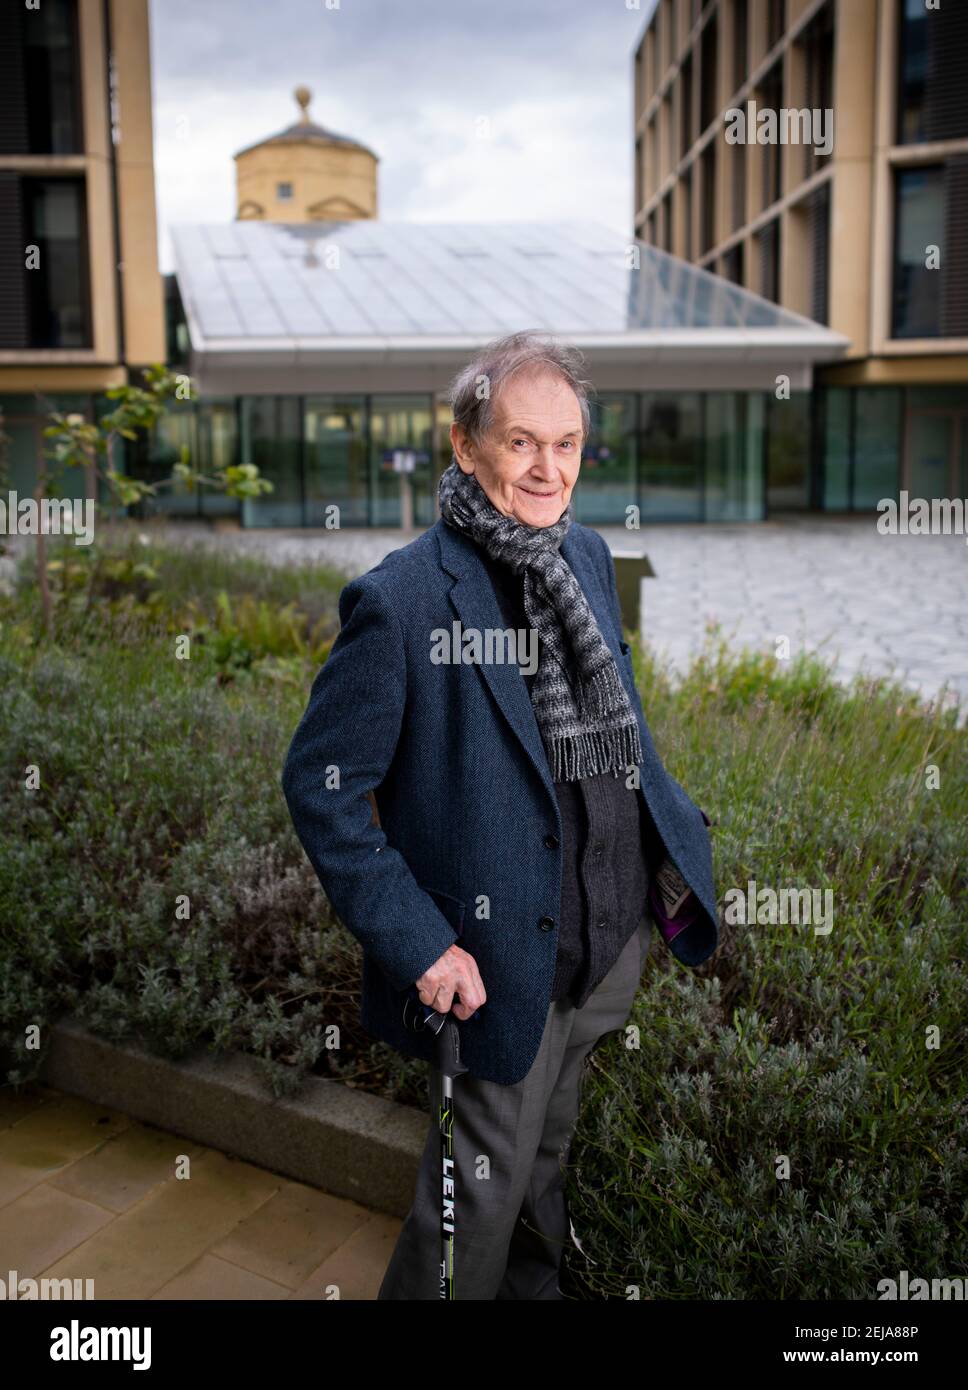 Sir Roger Penrose, Emeritus Professor at the Mathematical Institute of the University of Oxford. He has been awarded the Nobel Prize for Physics. Stock Photo